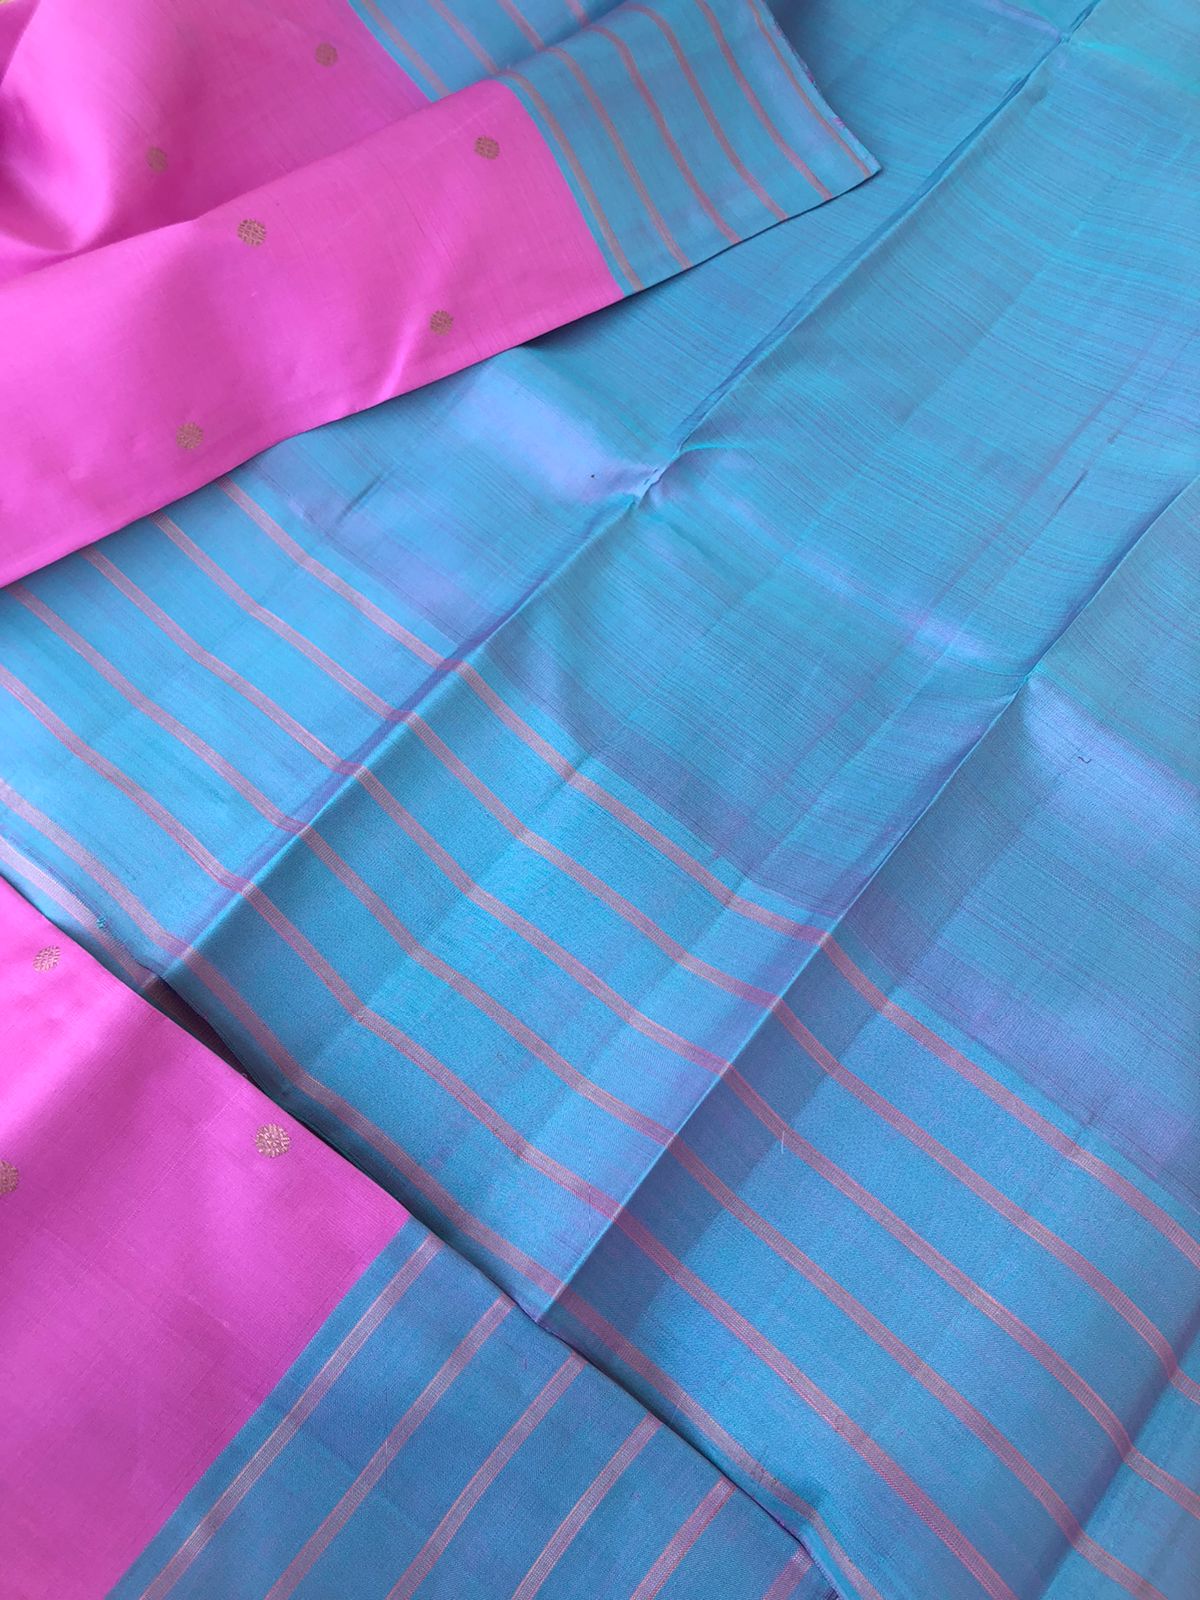 Corporate Kanchivarams - gorgeous rose pink body with baby blue short lavender pallu blouse and borders